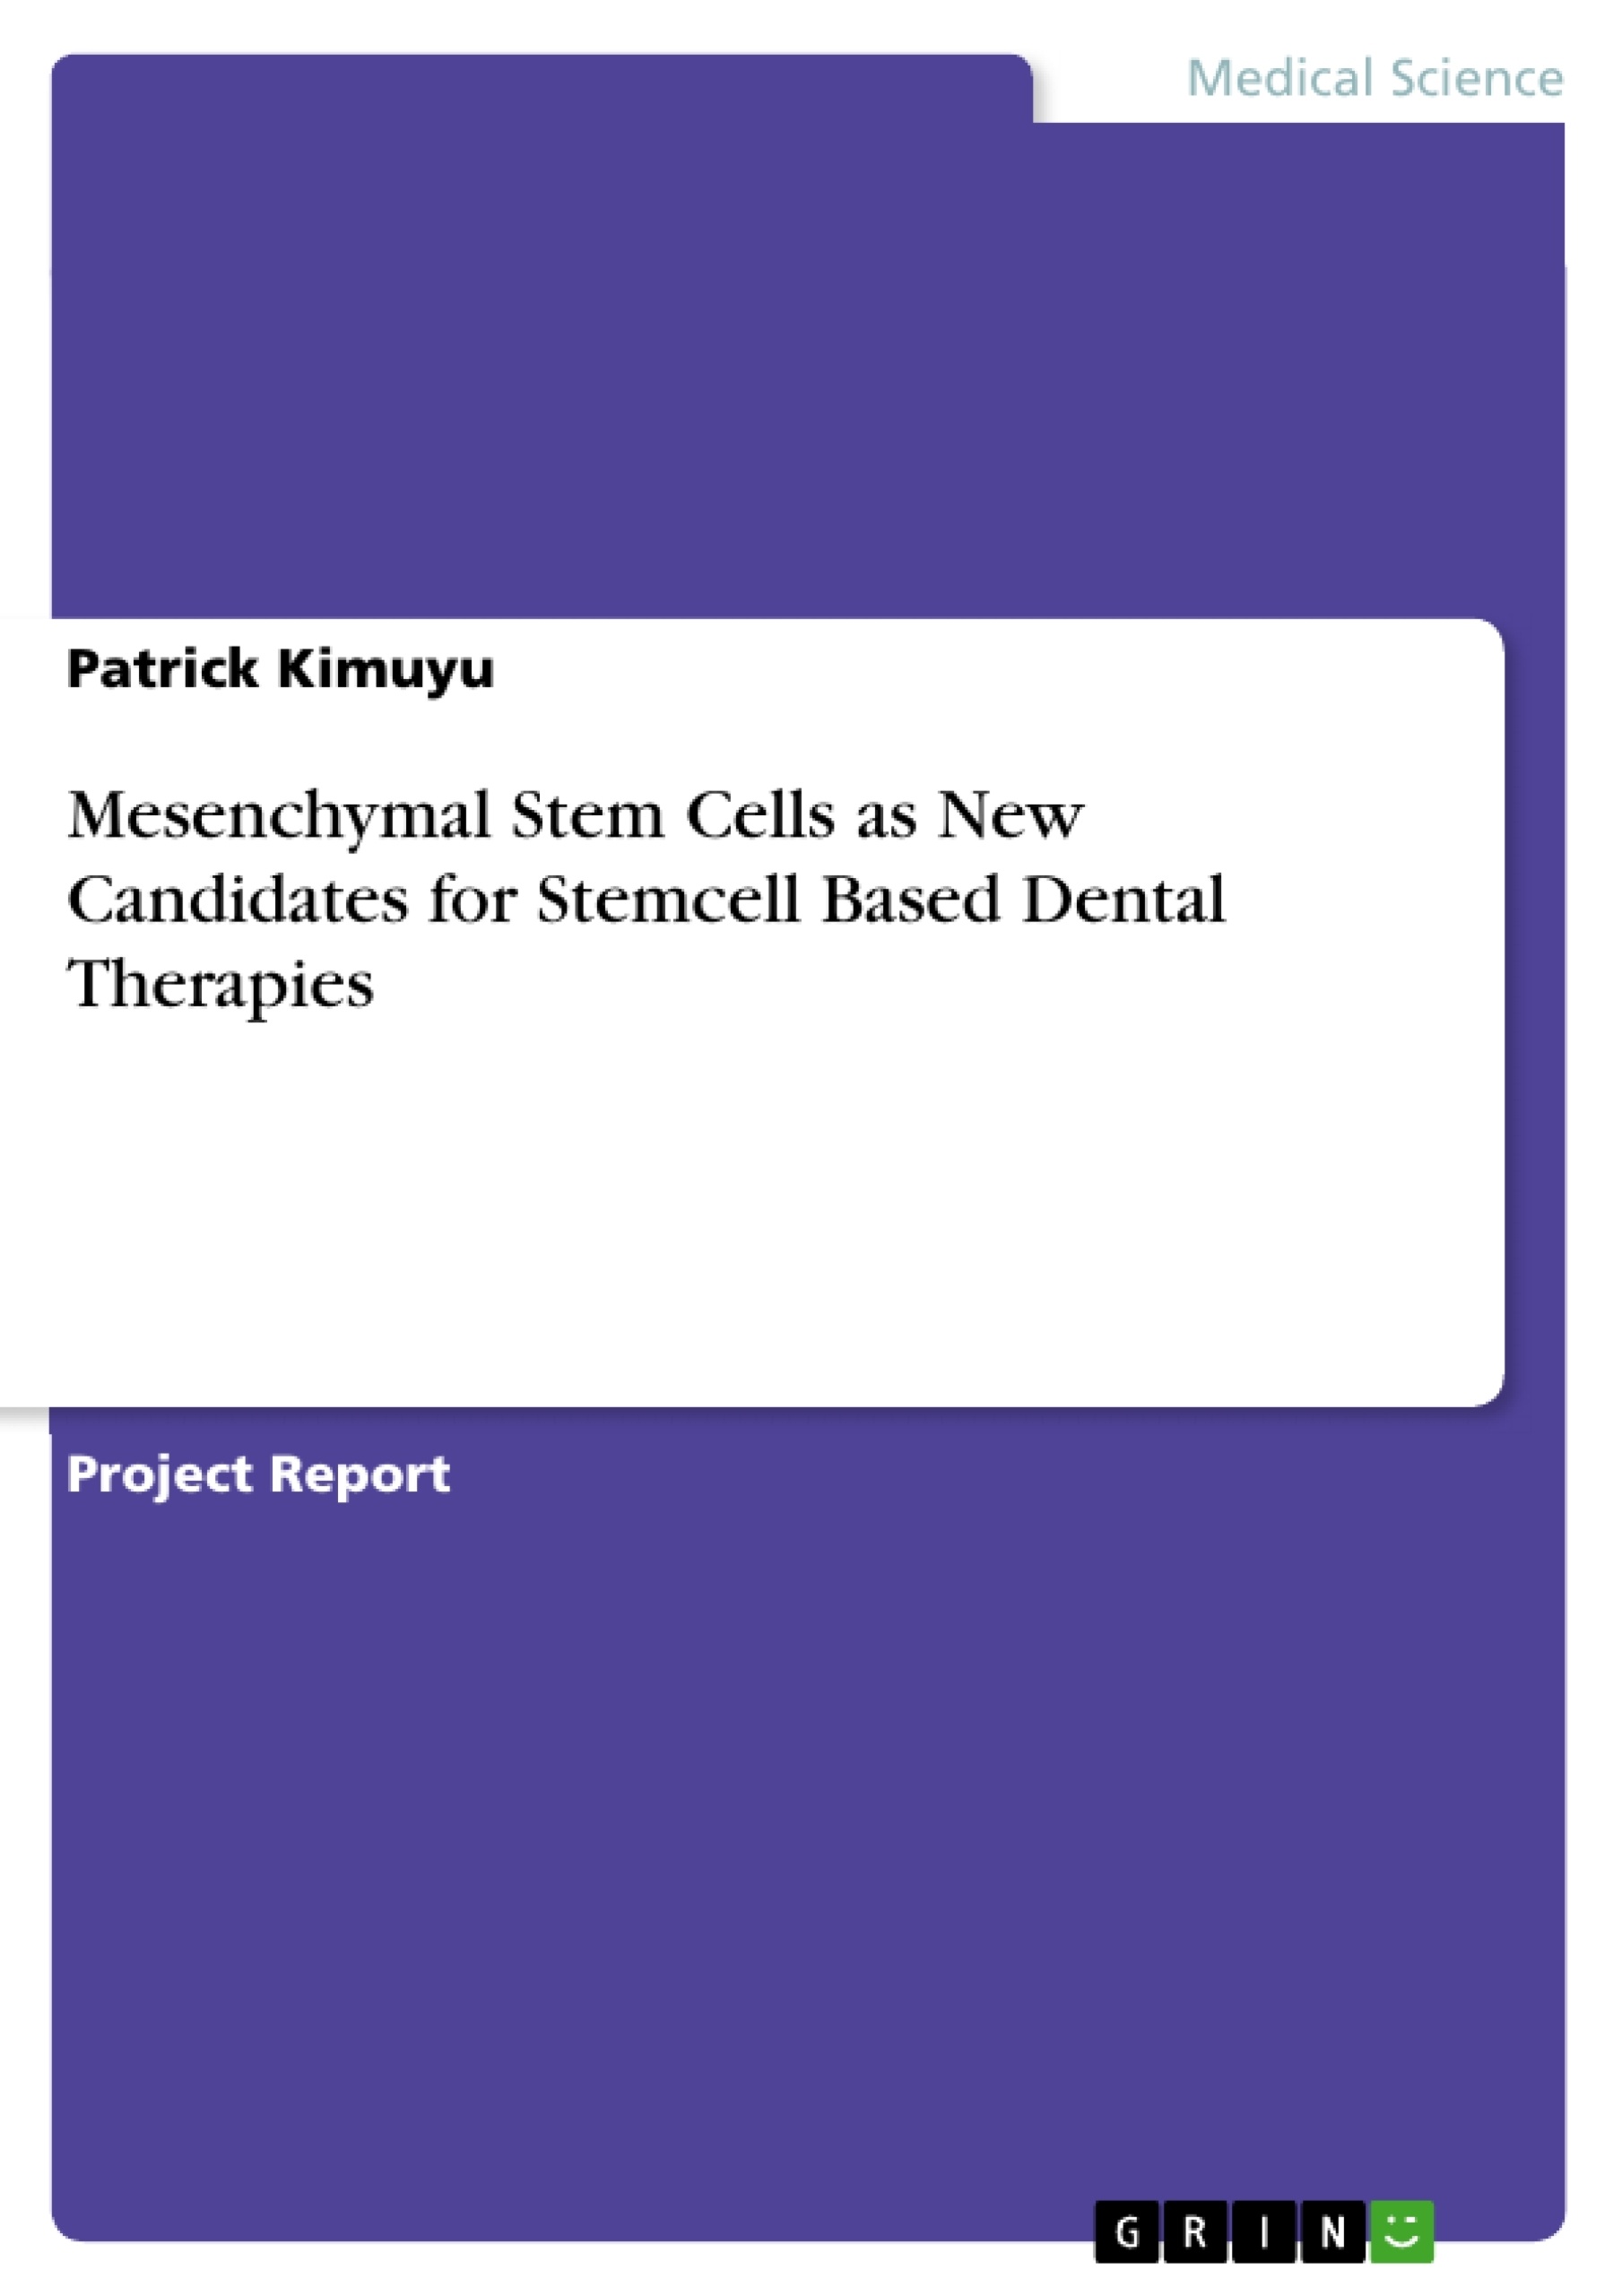 Title: Mesenchymal Stem Cells as New Candidates for Stemcell Based Dental Therapies